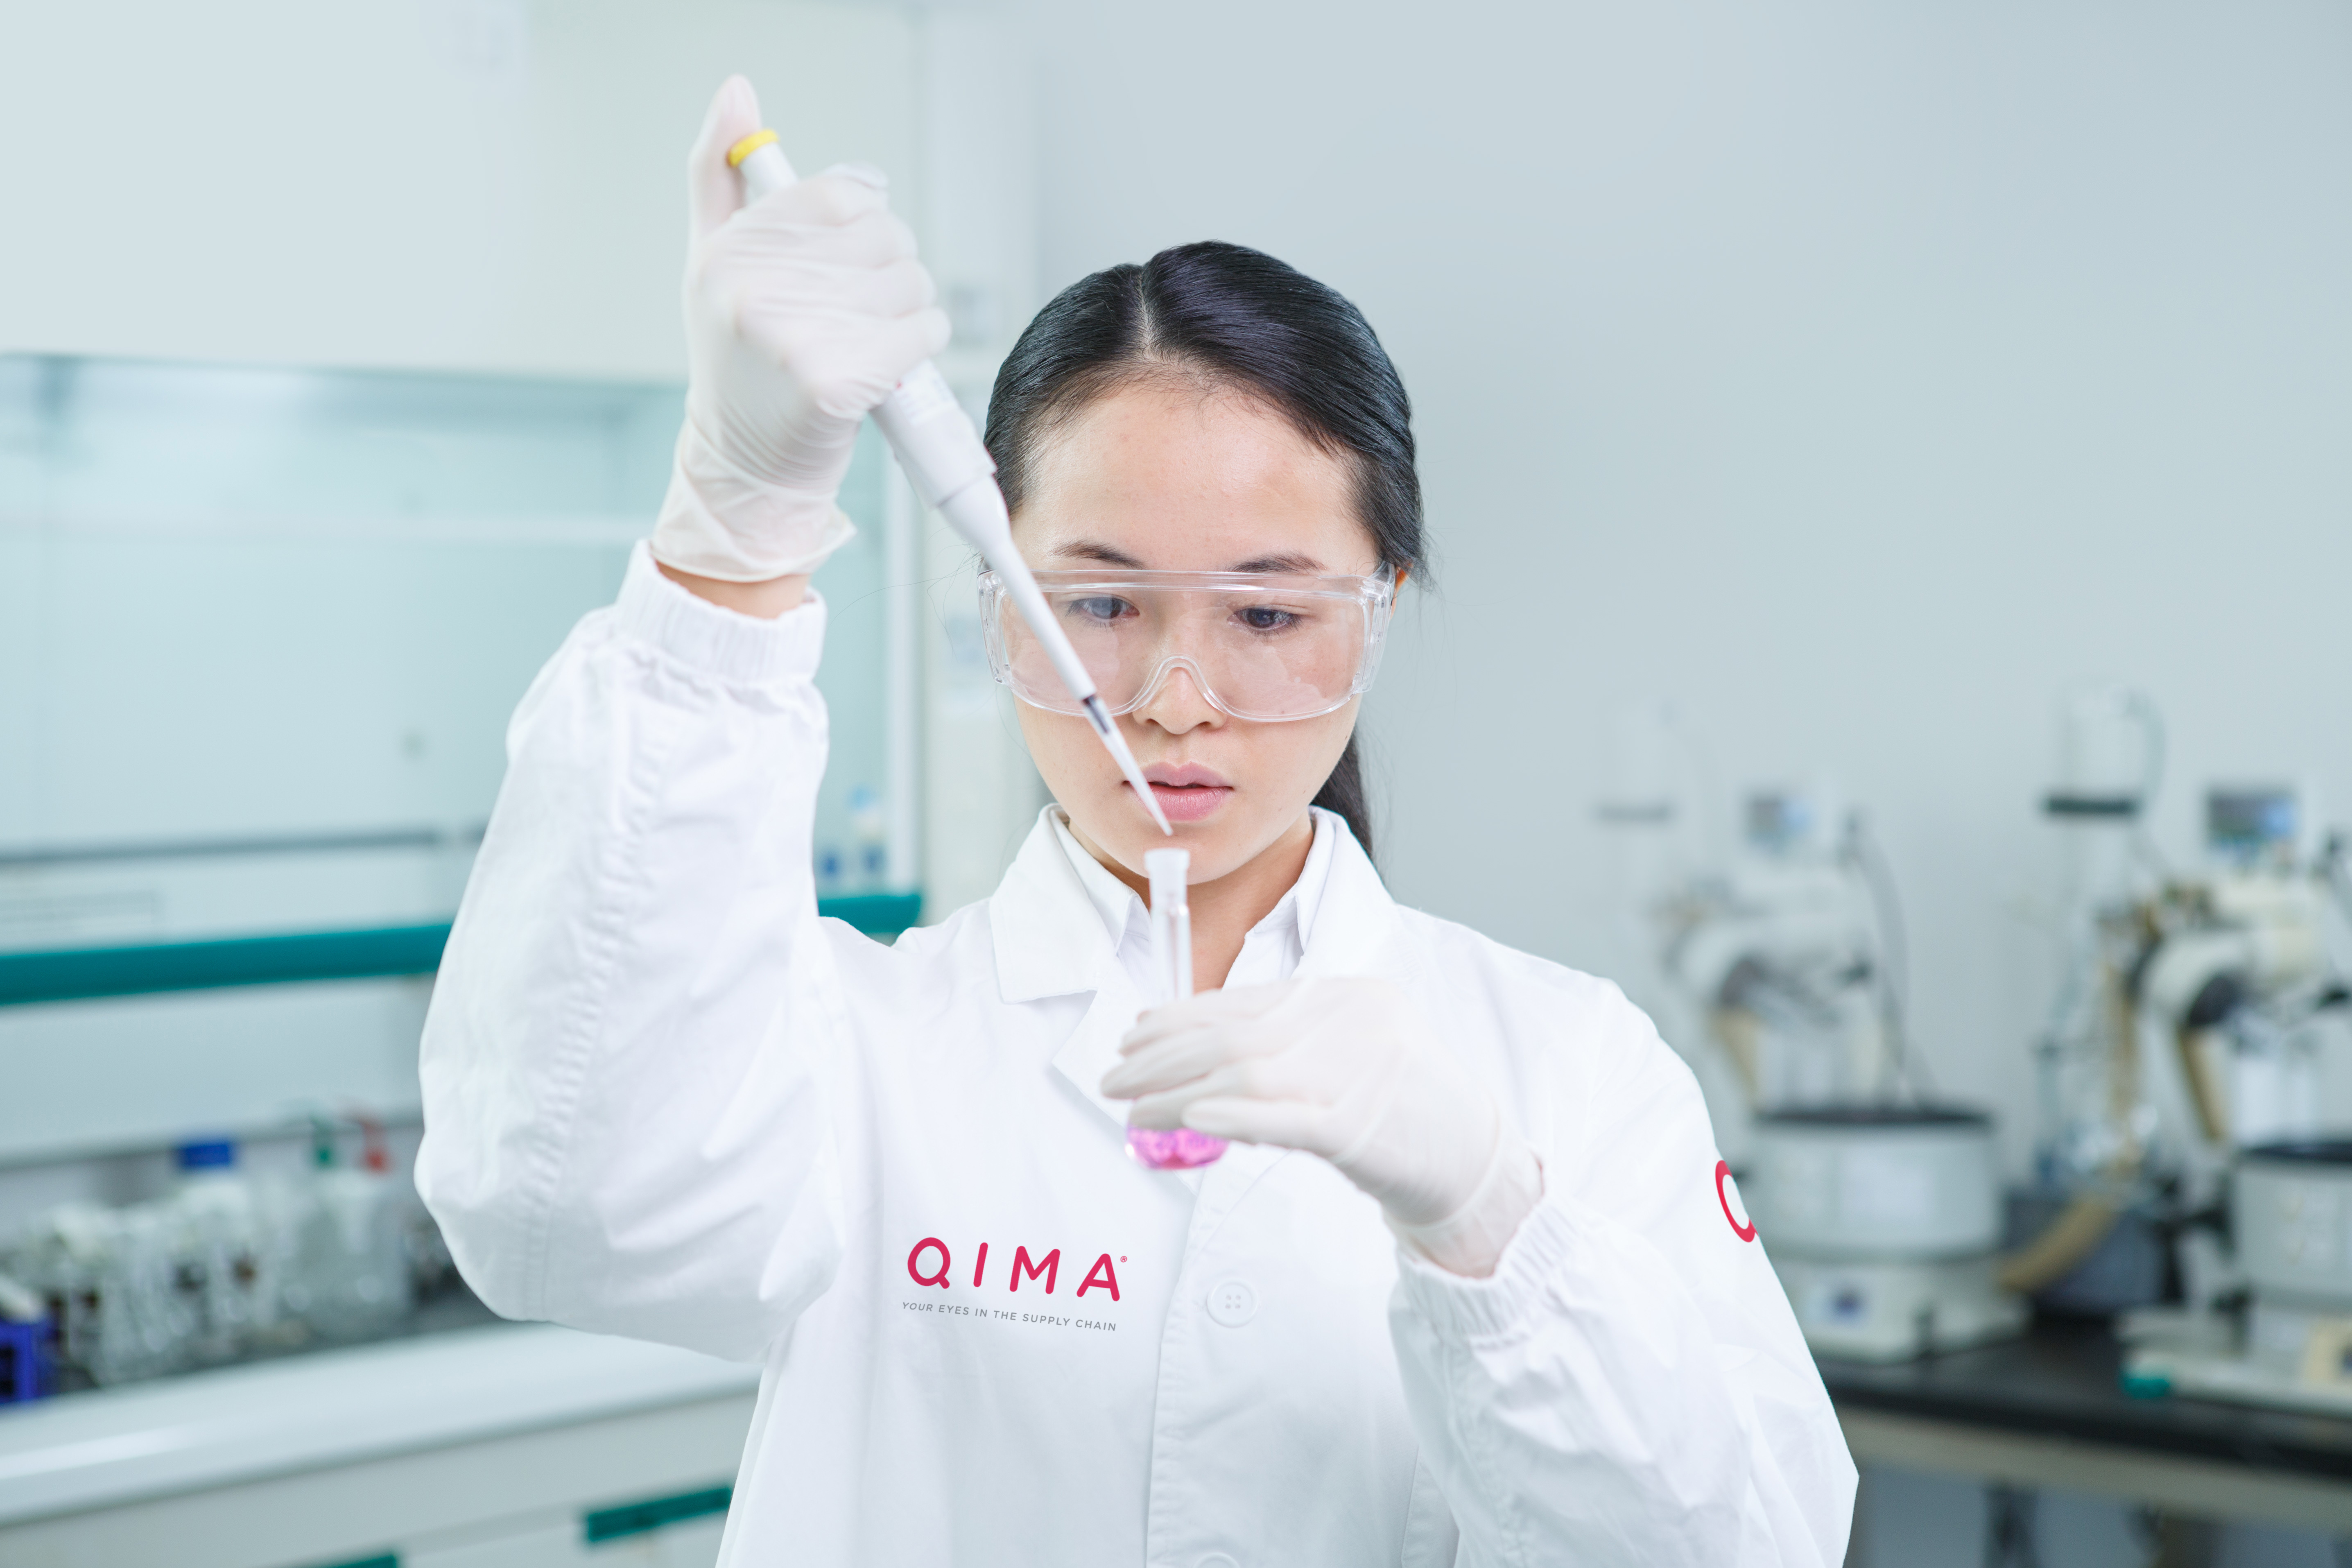 QIMA laboratory test performed as part of quality control check in China